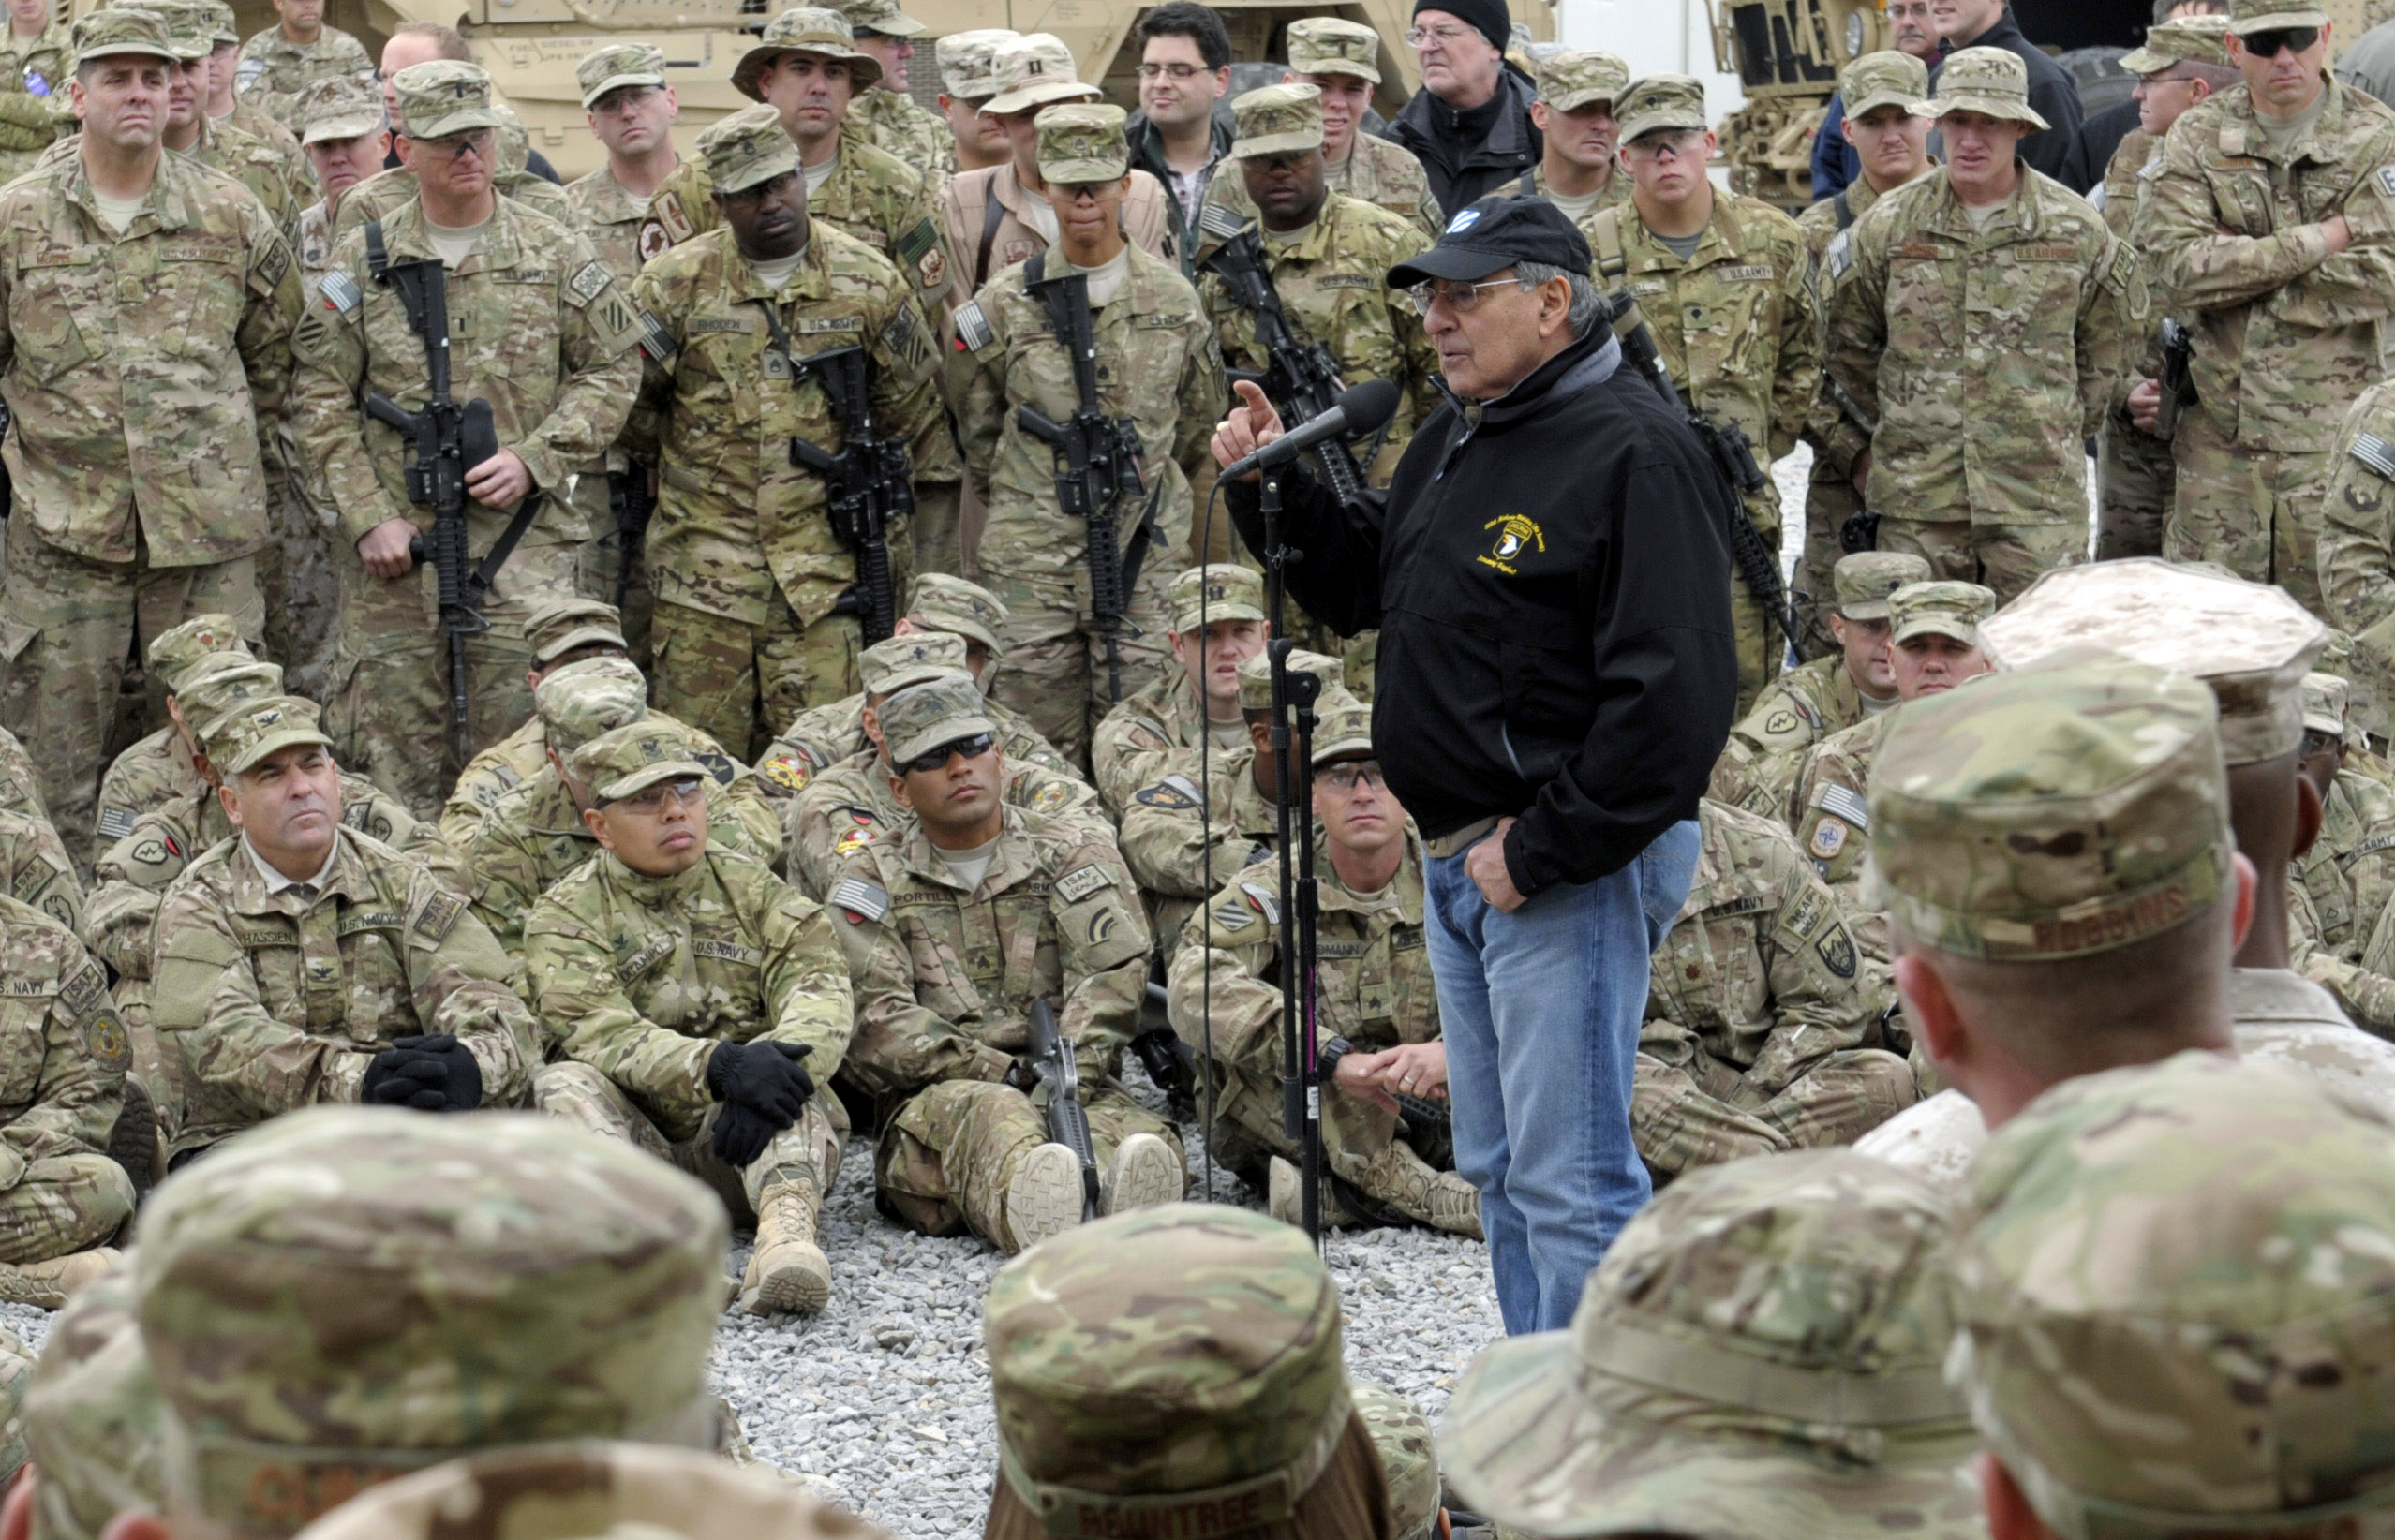 U.S. Defense Secretary Leon Panetta speaks to the troops during a visit to Kandahar Airfield on Dec. 13, 2013 in Kandahar, Afghanistan. (Getty Images)